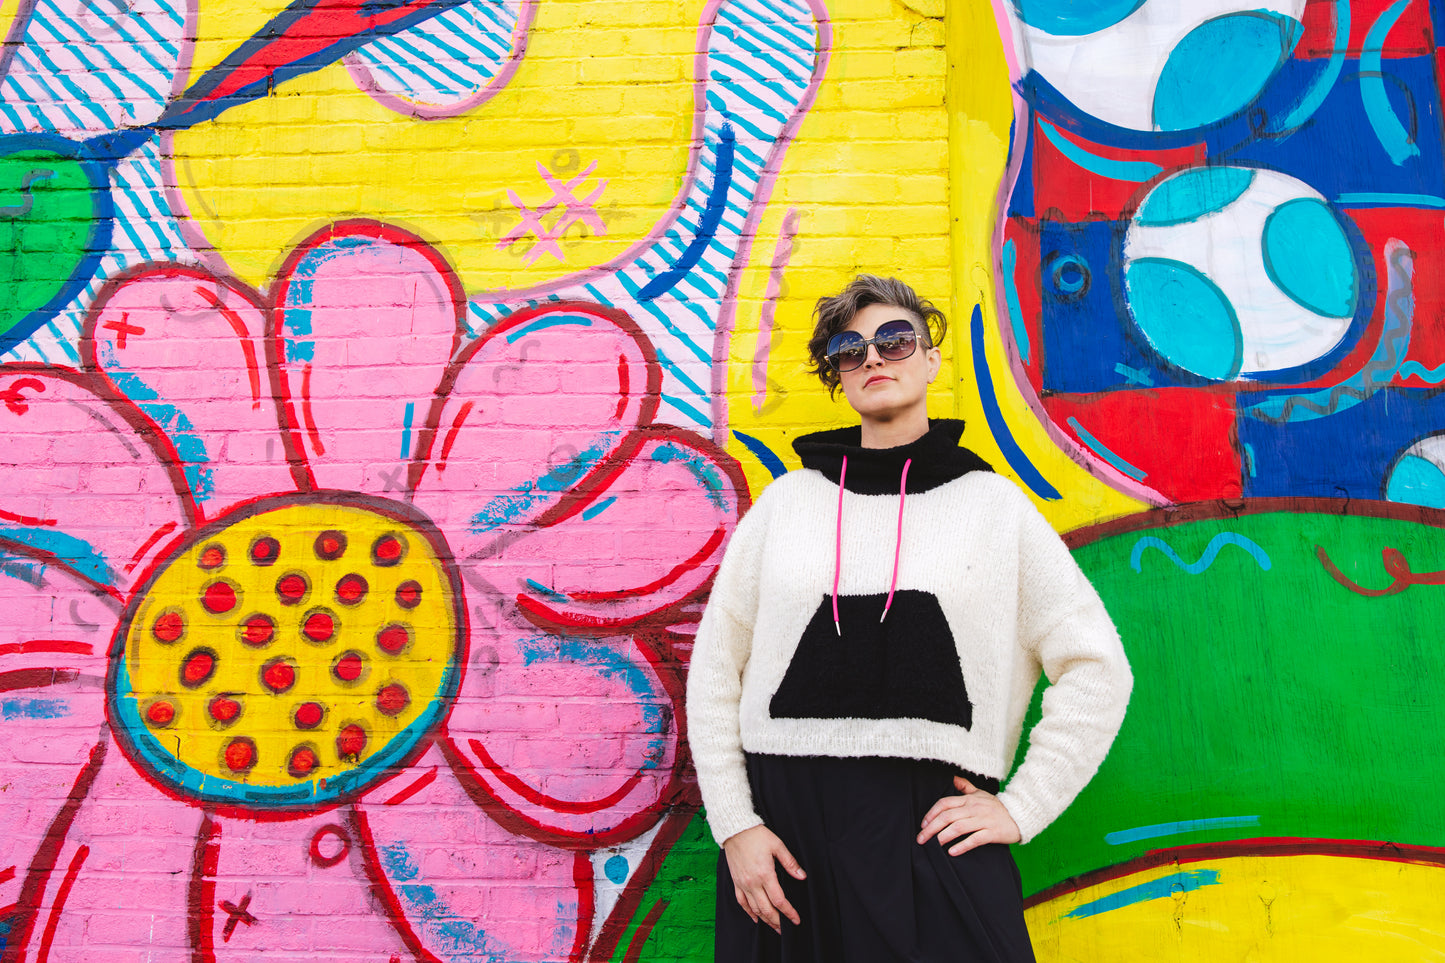 Jen stands in front of a wall mural, one hand on her hip, wearing sunglasses and looking past the camera. She wears an oversized hoodie, knit from black and white yarn.